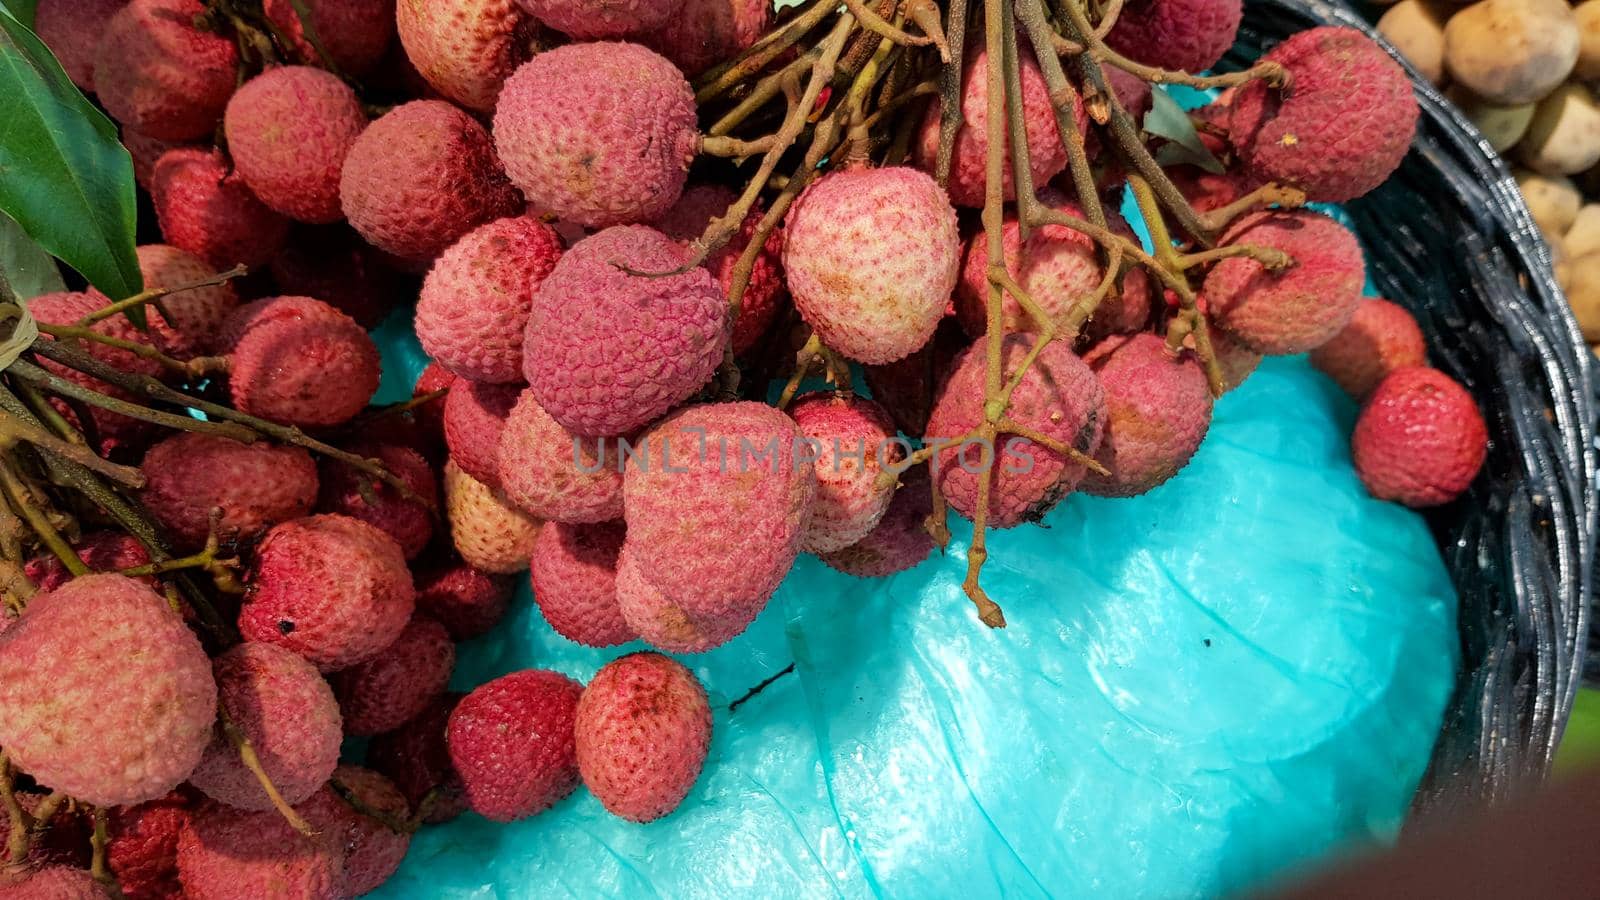 Red lychees are placed for sale in a shop in Thailand.